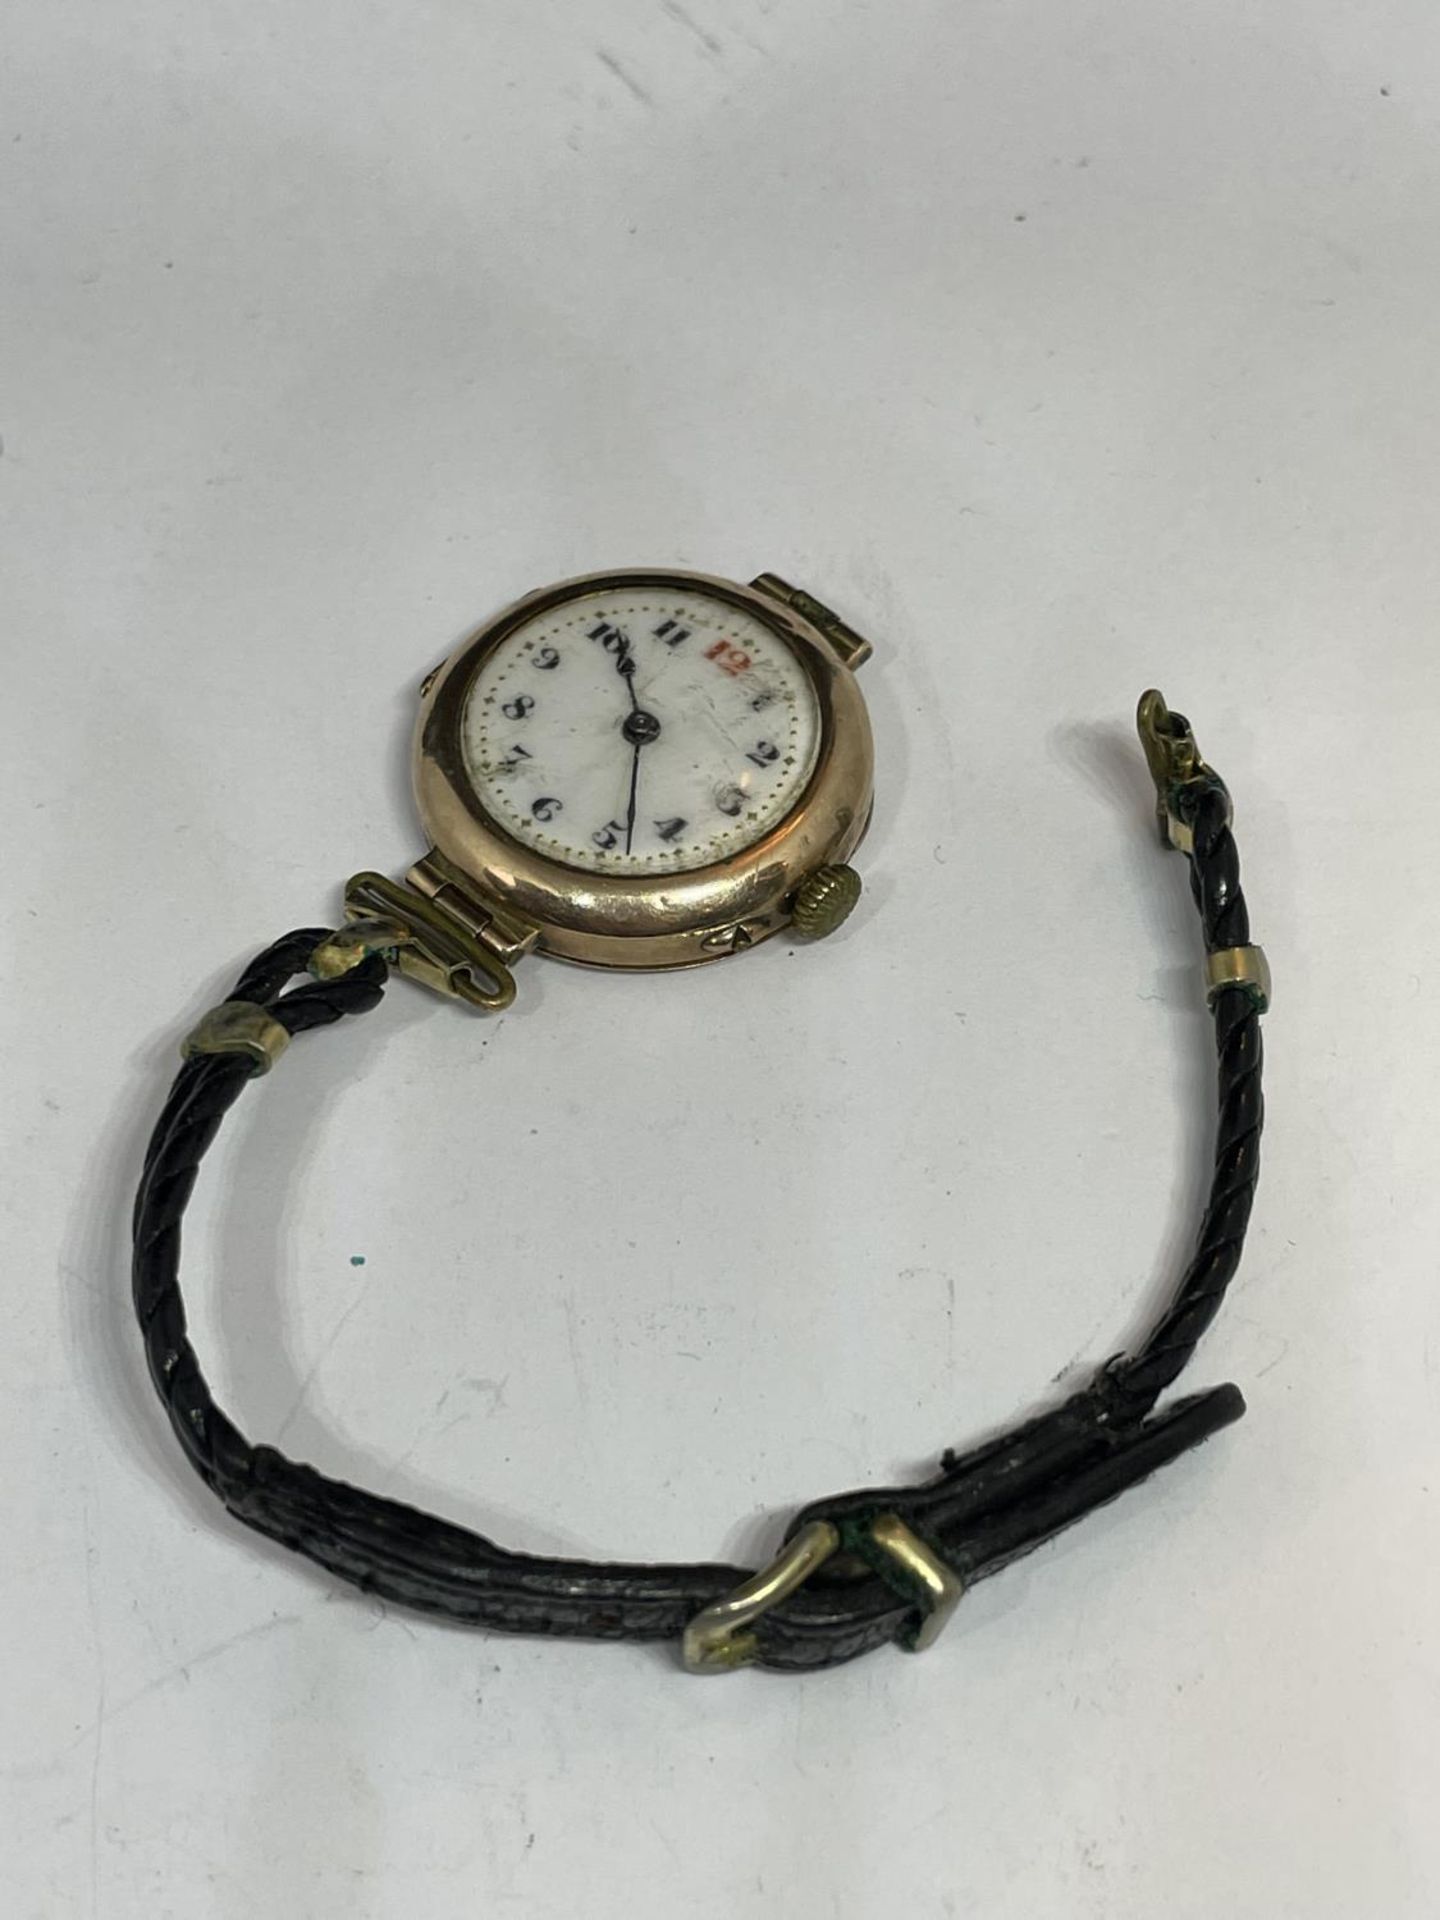 A MARKED 9 CARAT GOLD CASED WATCH WITH LEATHER STRAP IN NEED OF REPAIR